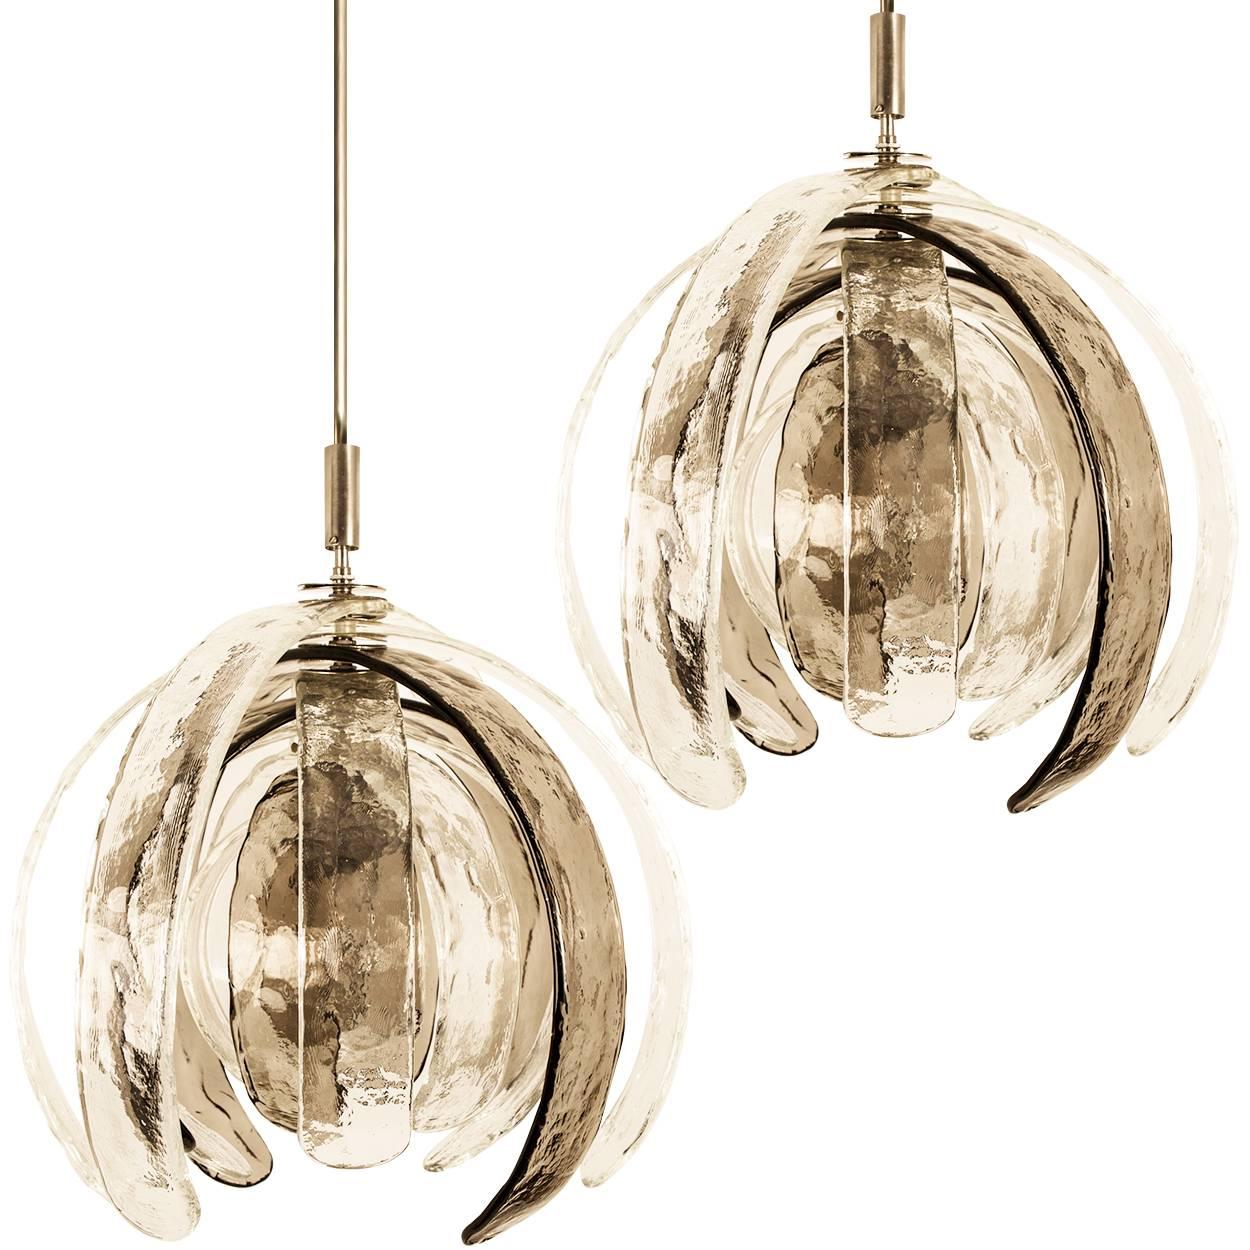 Pair of high-end sculptural artichoke chandeliers by Carlo Nason for Mazzega. Thick clear and bronze pattern glass blades. The blades from big to small can be put in the position of one line as unfolding into a flower. They can rotate independently.